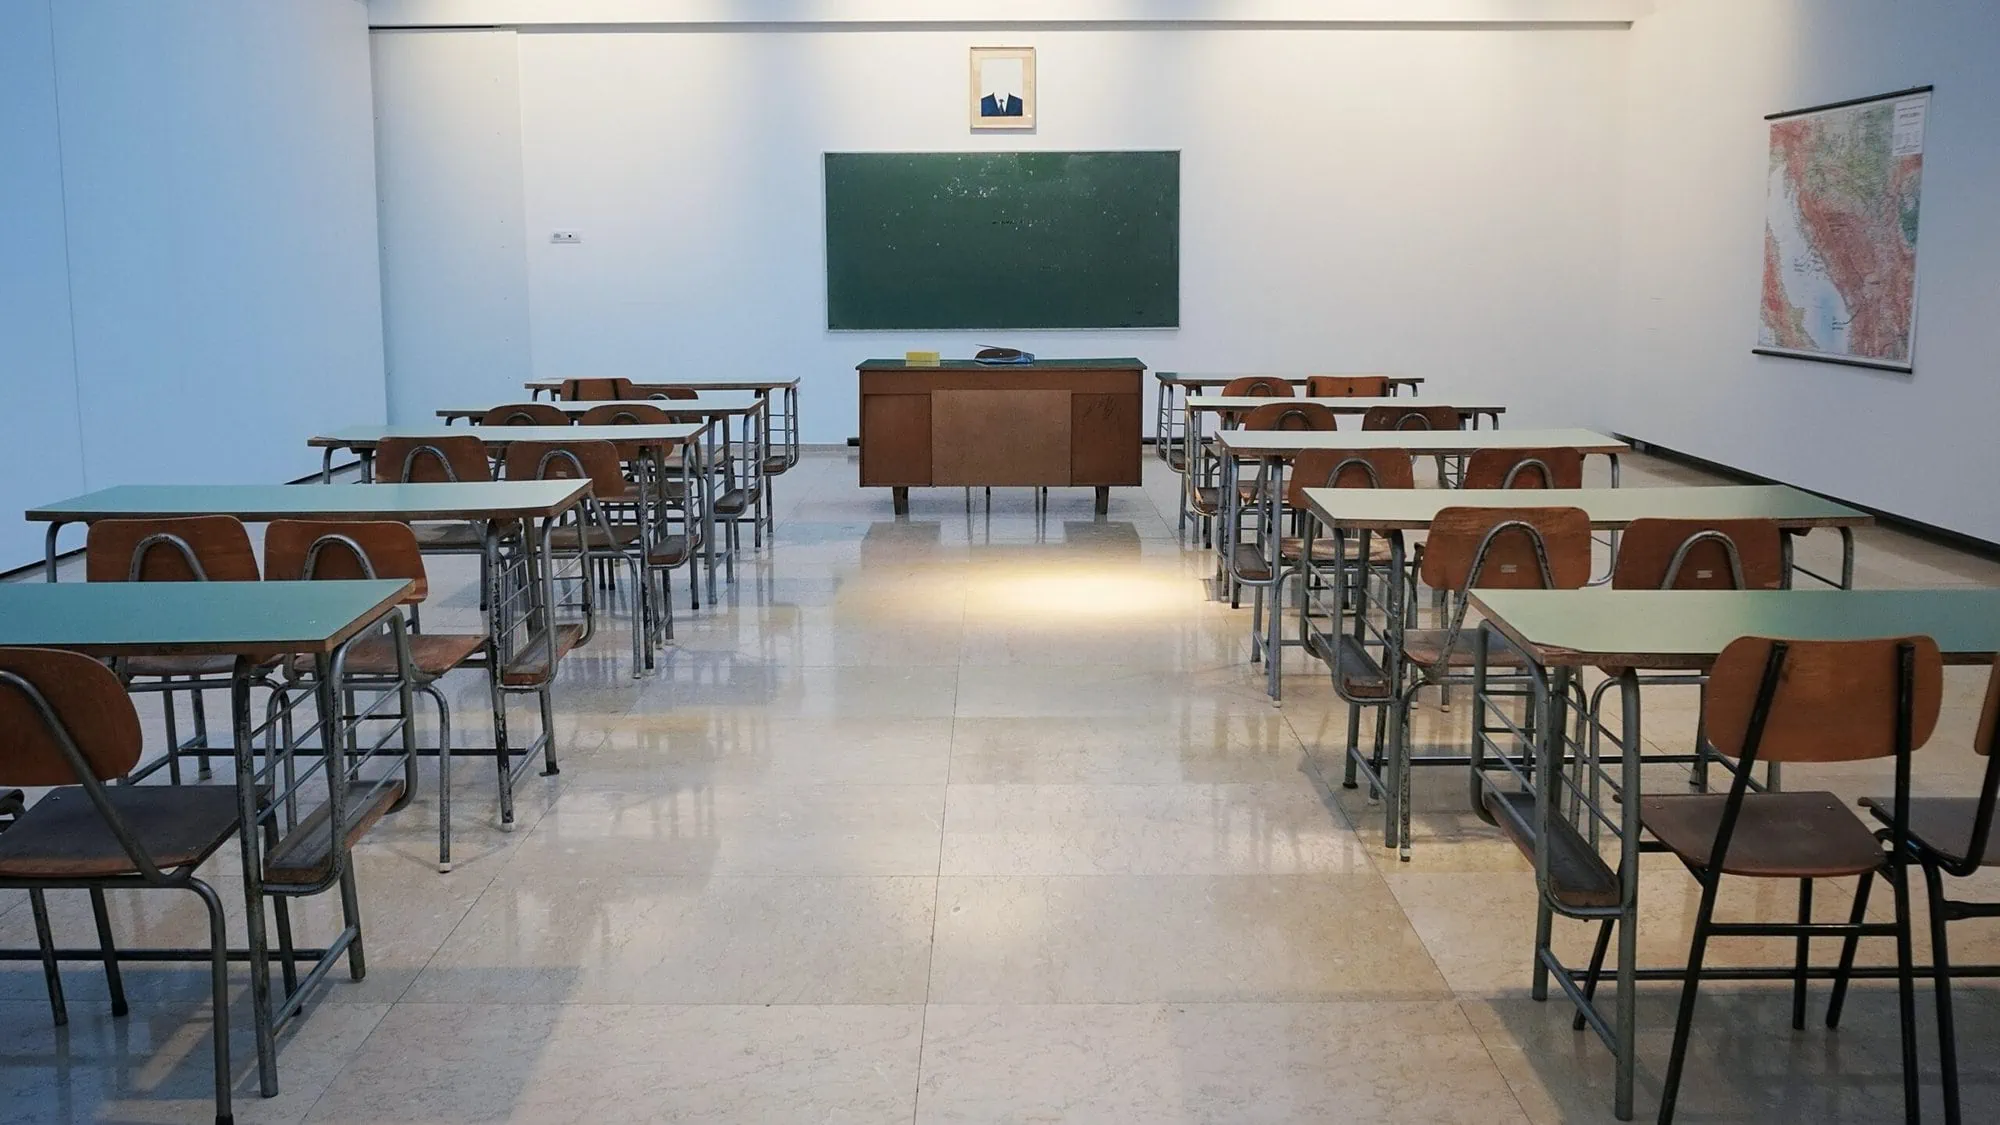 Empty classroom secured with lockdown system for school